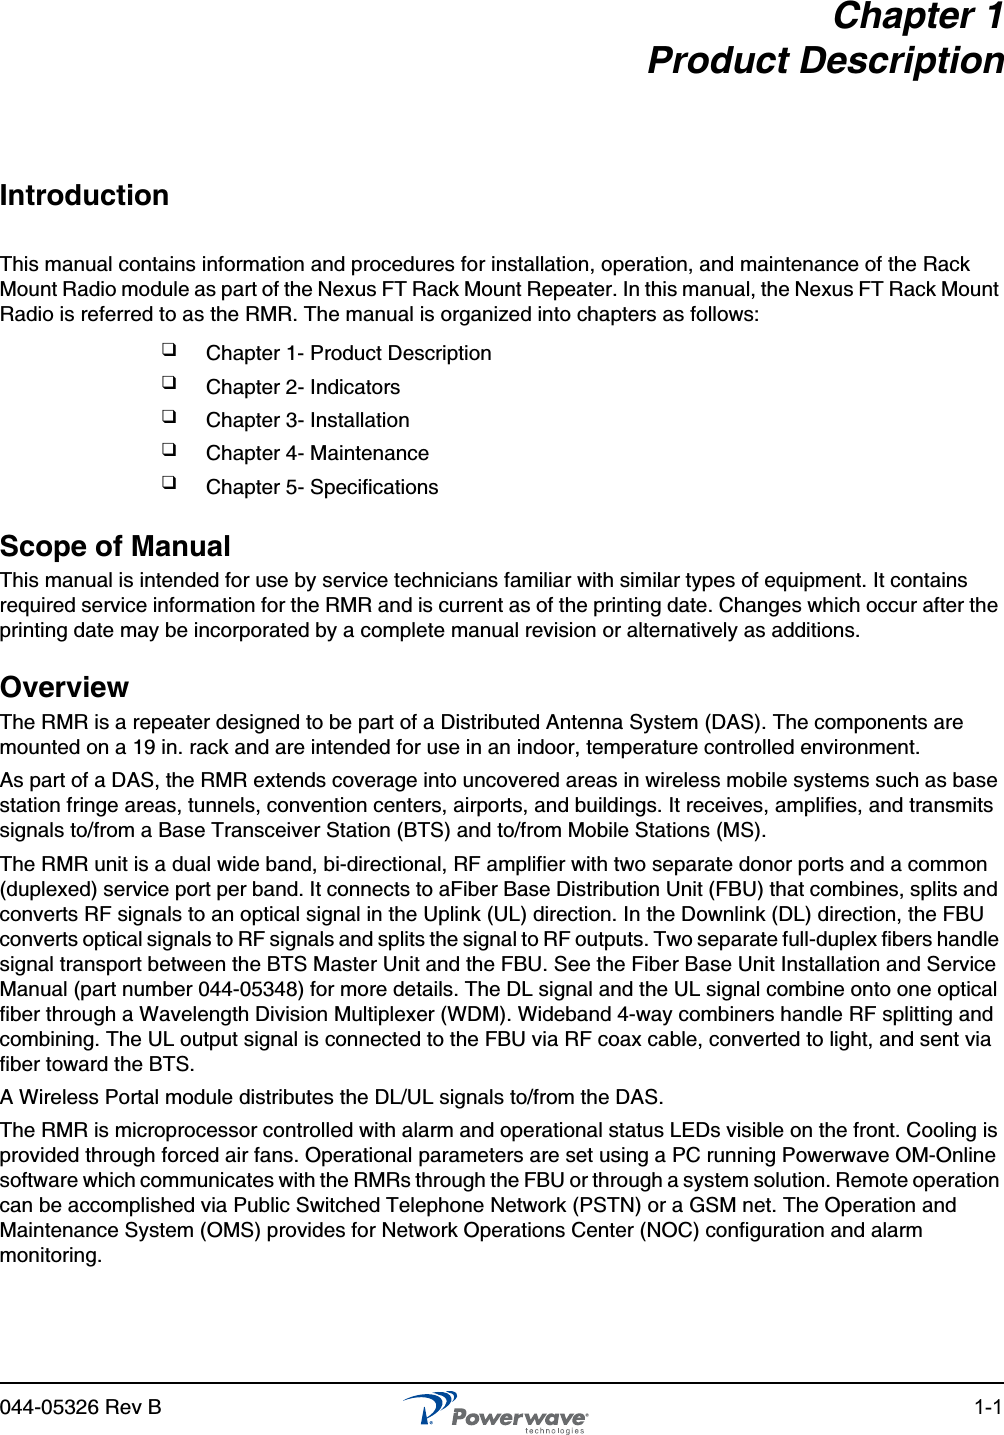 044-05326 Rev B 1-1Chapter 1Product DescriptionIntroductionThis manual contains information and procedures for installation, operation, and maintenance of the Rack Mount Radio module as part of the Nexus FT Rack Mount Repeater. In this manual, the Nexus FT Rack Mount Radio is referred to as the RMR. The manual is organized into chapters as follows:Scope of ManualThis manual is intended for use by service technicians familiar with similar types of equipment. It contains required service information for the RMR and is current as of the printing date. Changes which occur after the printing date may be incorporated by a complete manual revision or alternatively as additions.OverviewThe RMR is a repeater designed to be part of a Distributed Antenna System (DAS). The components are mounted on a 19 in. rack and are intended for use in an indoor, temperature controlled environment.As part of a DAS, the RMR extends coverage into uncovered areas in wireless mobile systems such as base station fringe areas, tunnels, convention centers, airports, and buildings. It receives, amplifies, and transmits signals to/from a Base Transceiver Station (BTS) and to/from Mobile Stations (MS).The RMR unit is a dual wide band, bi-directional, RF amplifier with two separate donor ports and a common (duplexed) service port per band. It connects to aFiber Base Distribution Unit (FBU) that combines, splits and converts RF signals to an optical signal in the Uplink (UL) direction. In the Downlink (DL) direction, the FBU converts optical signals to RF signals and splits the signal to RF outputs. Two separate full-duplex fibers handle signal transport between the BTS Master Unit and the FBU. See the Fiber Base Unit Installation and Service Manual (part number 044-05348) for more details. The DL signal and the UL signal combine onto one optical fiber through a Wavelength Division Multiplexer (WDM). Wideband 4-way combiners handle RF splitting and combining. The UL output signal is connected to the FBU via RF coax cable, converted to light, and sent via fiber toward the BTS.A Wireless Portal module distributes the DL/UL signals to/from the DAS. The RMR is microprocessor controlled with alarm and operational status LEDs visible on the front. Cooling is provided through forced air fans. Operational parameters are set using a PC running Powerwave OM-Online software which communicates with the RMRs through the FBU or through a system solution. Remote operation can be accomplished via Public Switched Telephone Network (PSTN) or a GSM net. The Operation and Maintenance System (OMS) provides for Network Operations Center (NOC) configuration and alarm monitoring.❑Chapter 1- Product Description❑Chapter 2- Indicators❑Chapter 3- Installation❑Chapter 4- Maintenance❑Chapter 5- Specifications